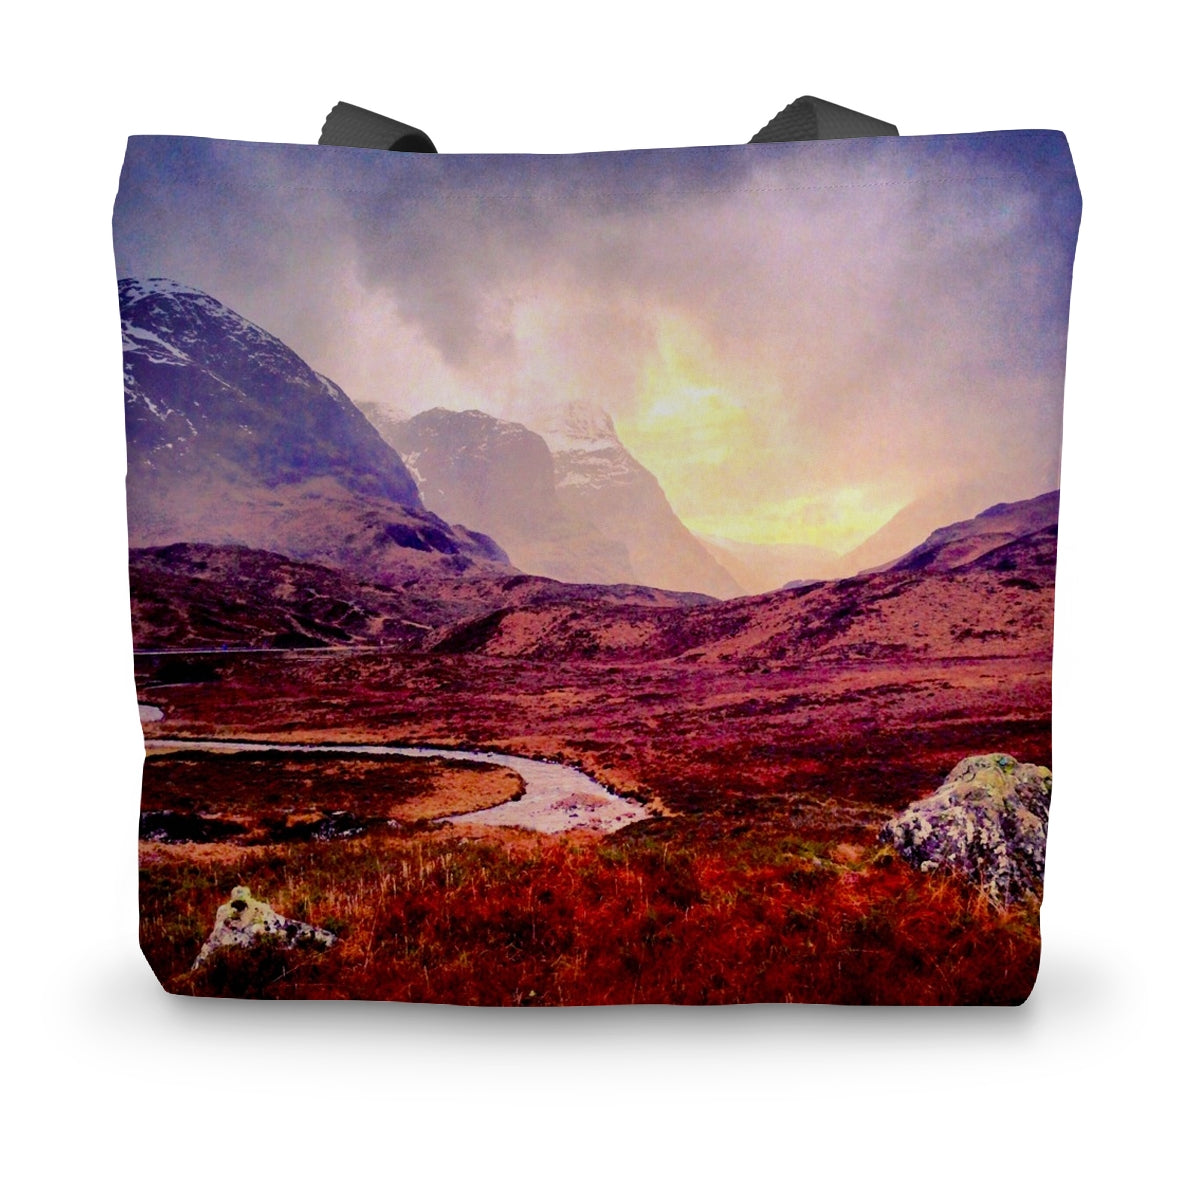 A Brooding Glencoe Art Gifts Canvas Tote Bag-Bags-Glencoe Art Gallery-14"x18.5"-Paintings, Prints, Homeware, Art Gifts From Scotland By Scottish Artist Kevin Hunter